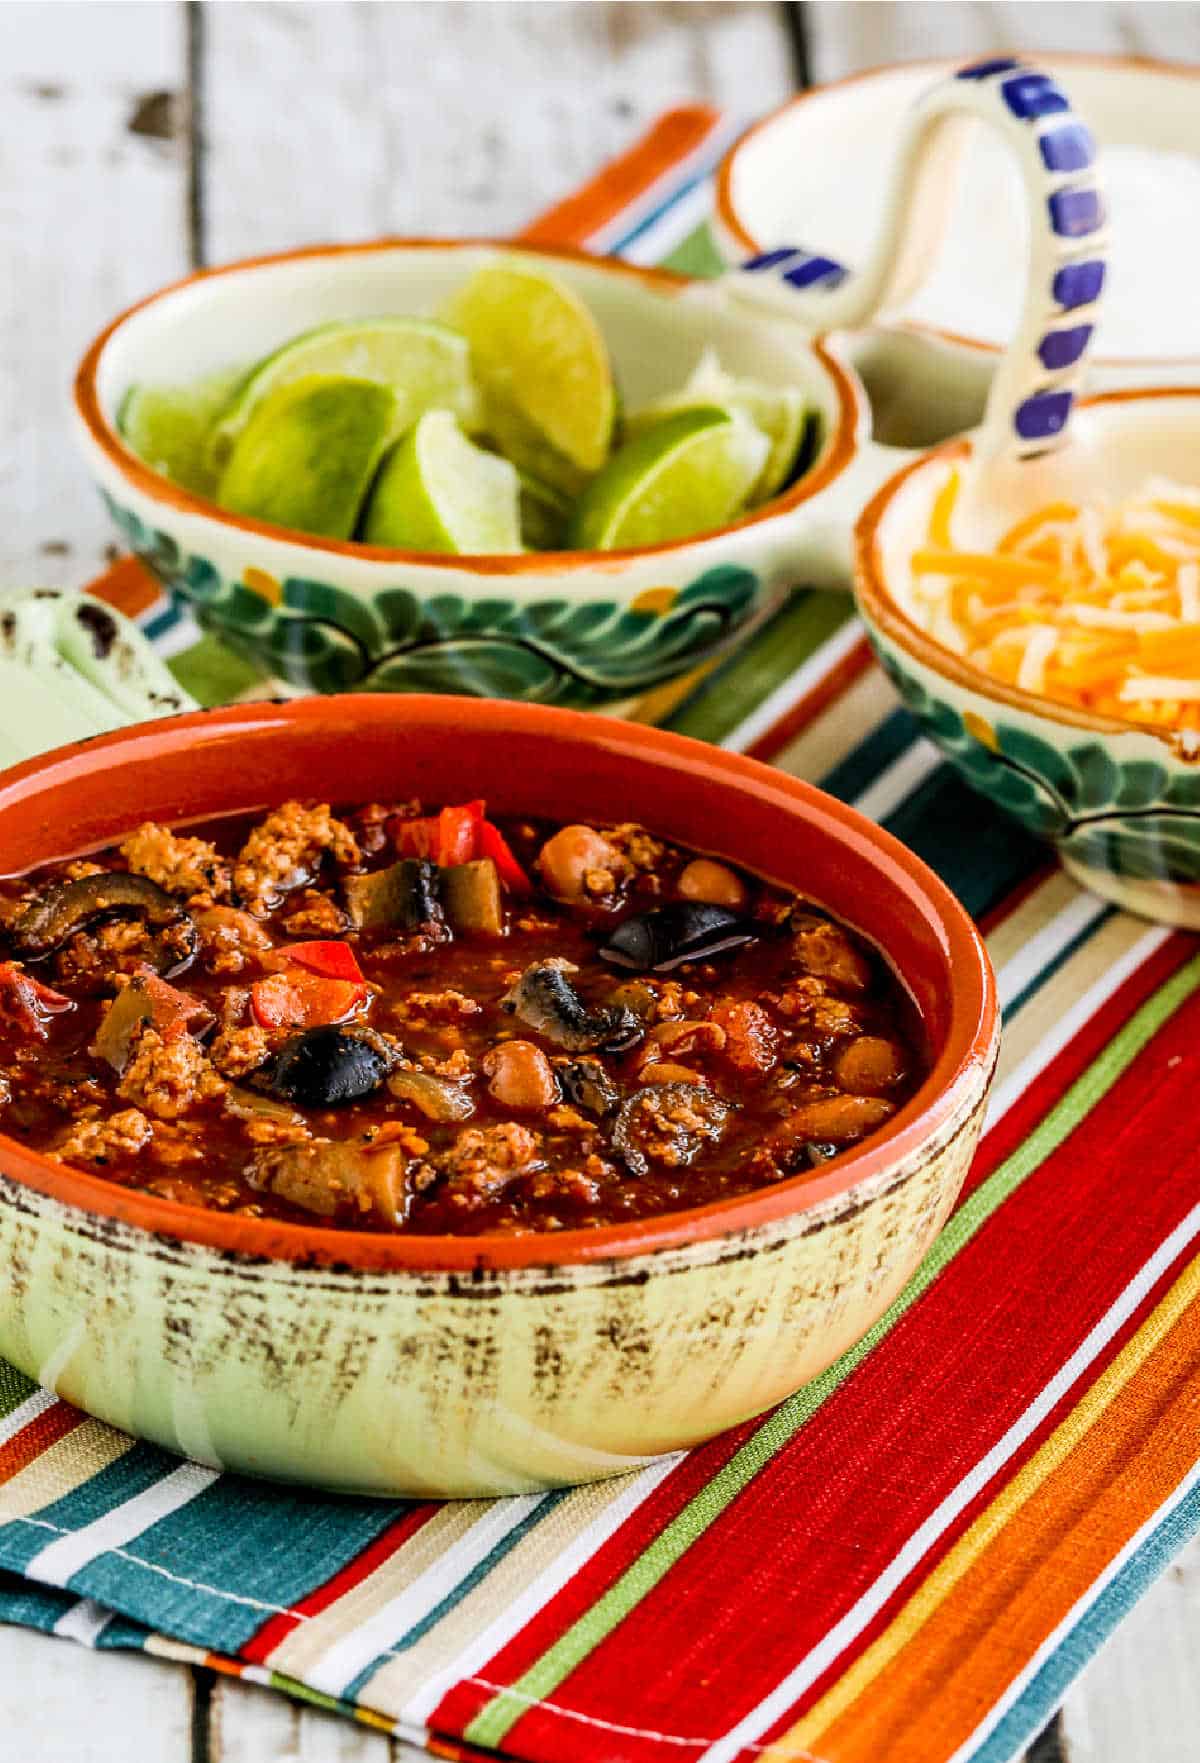 Cutout image of turkey chili with peppers, mushrooms and olives